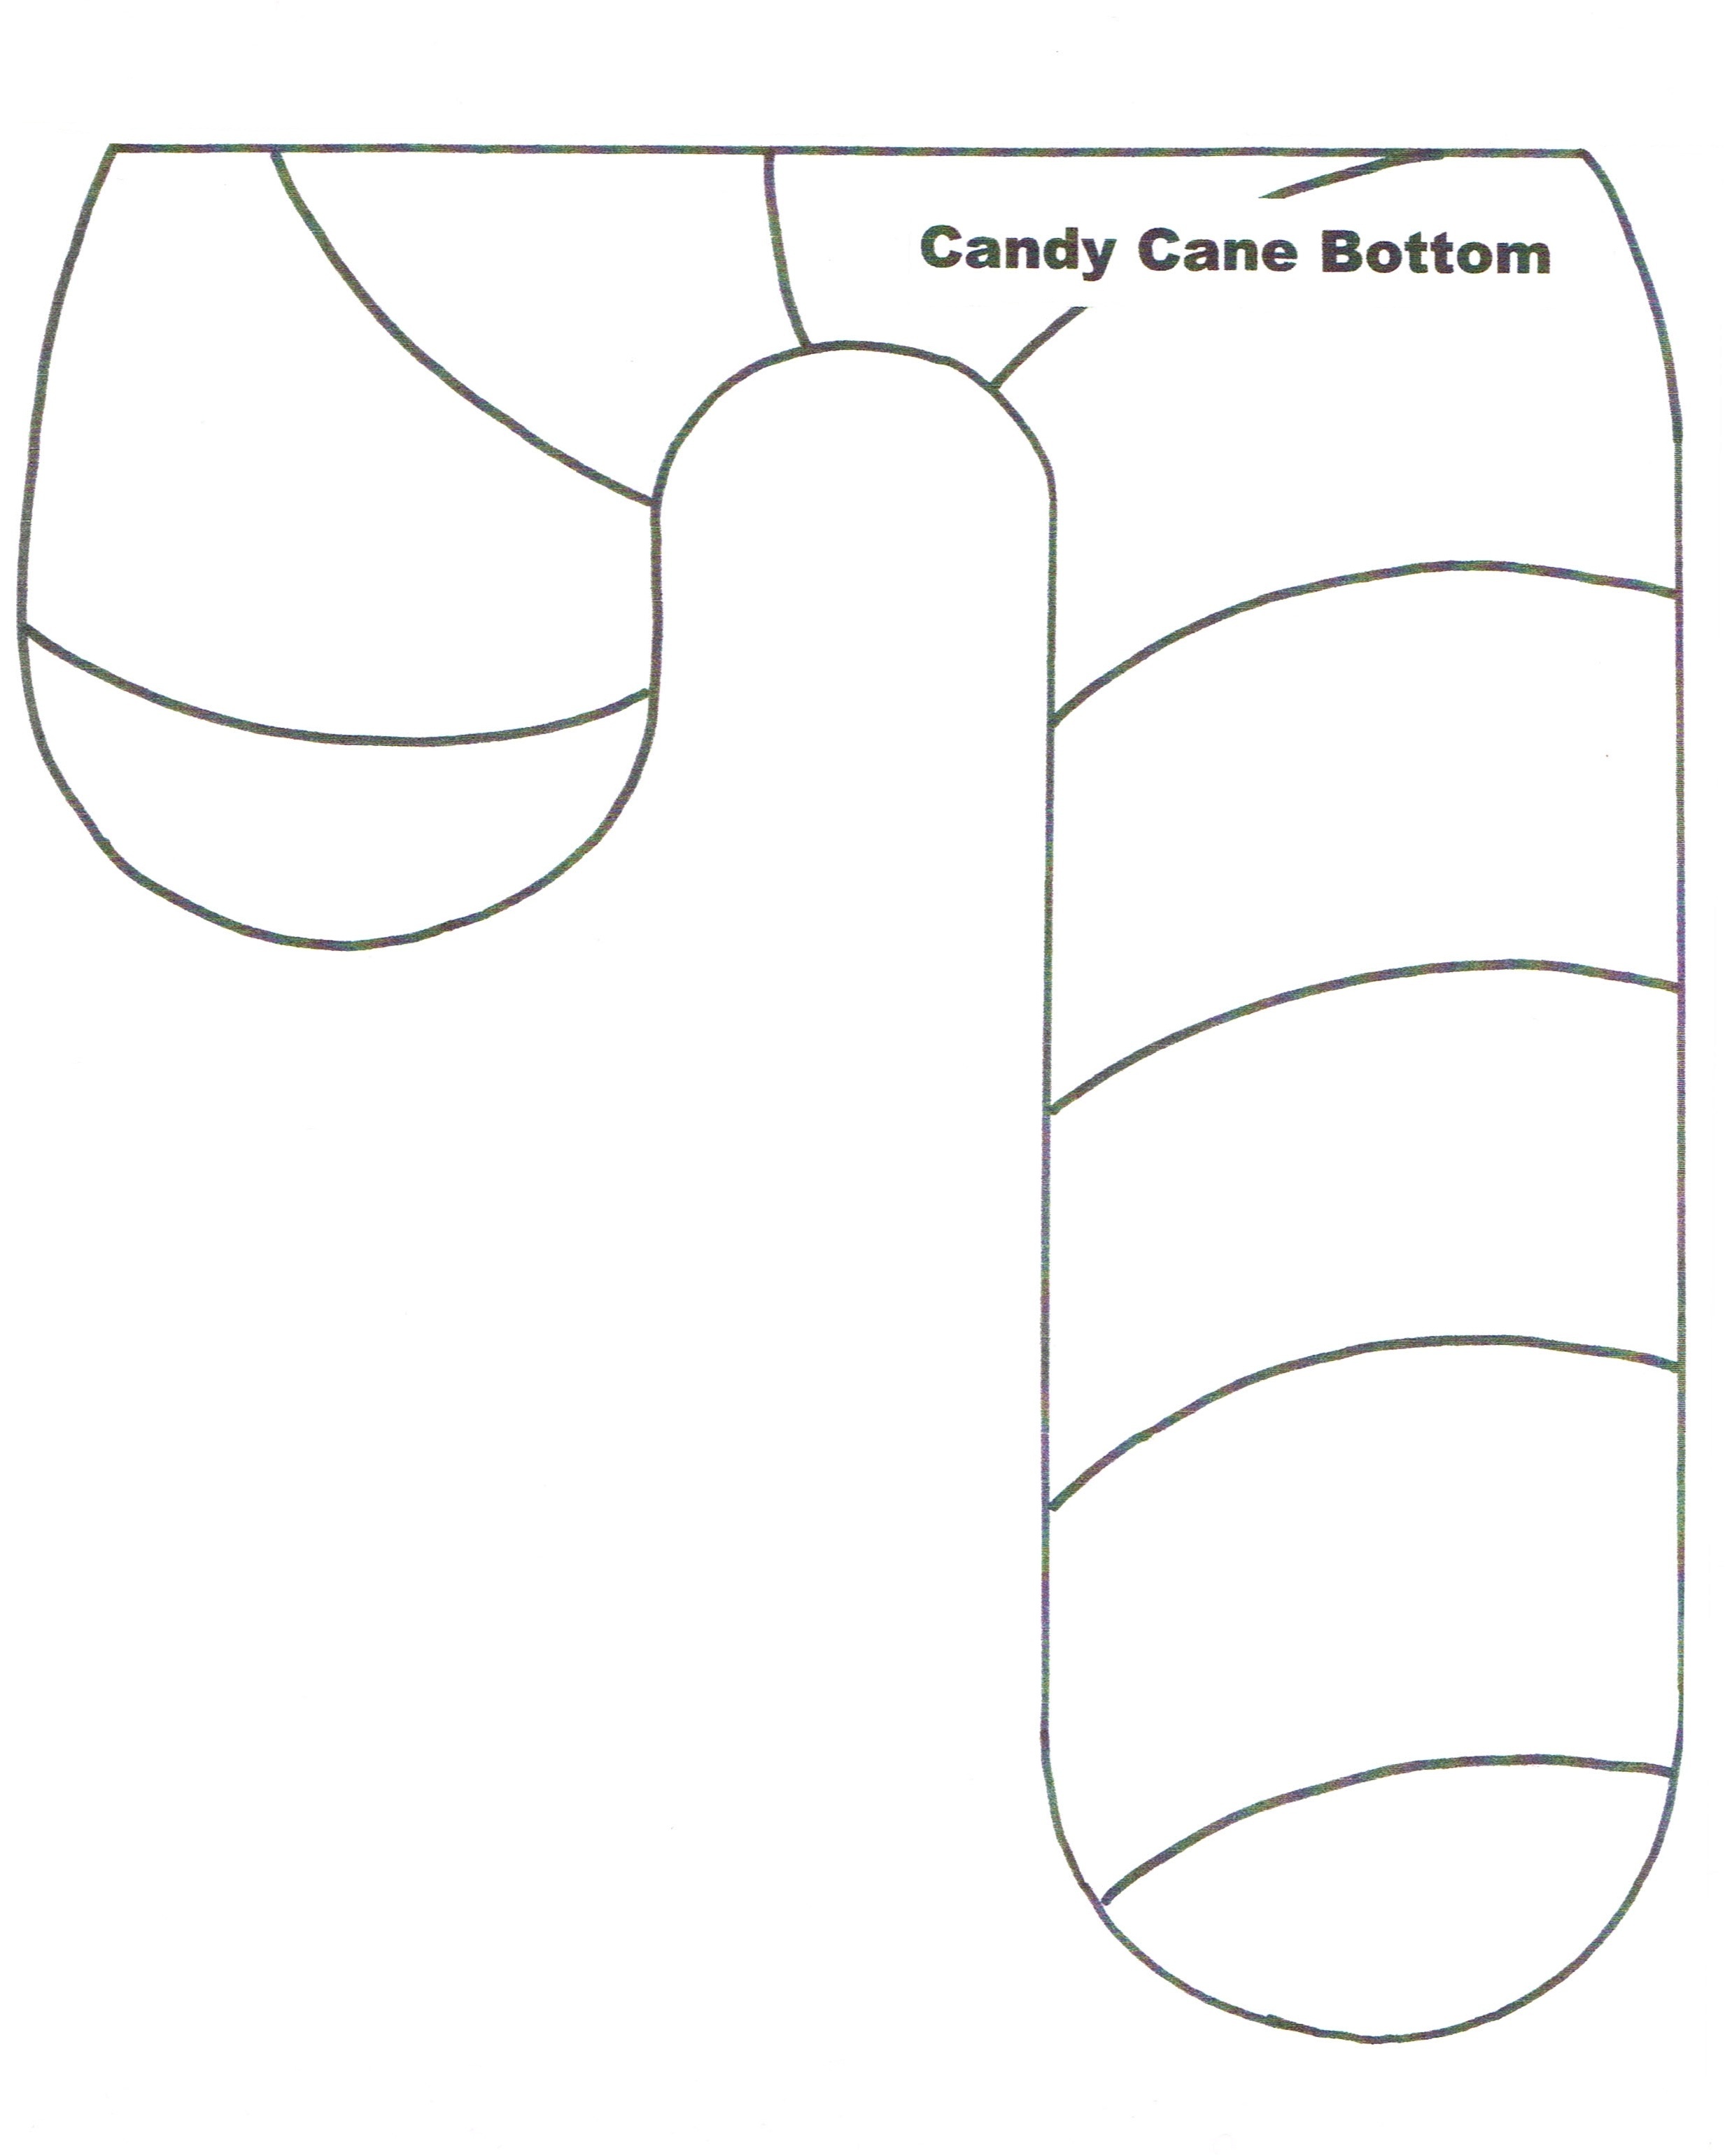 Candy Cane Template | Madinbelgrade - Free Candy Cane Template Printable